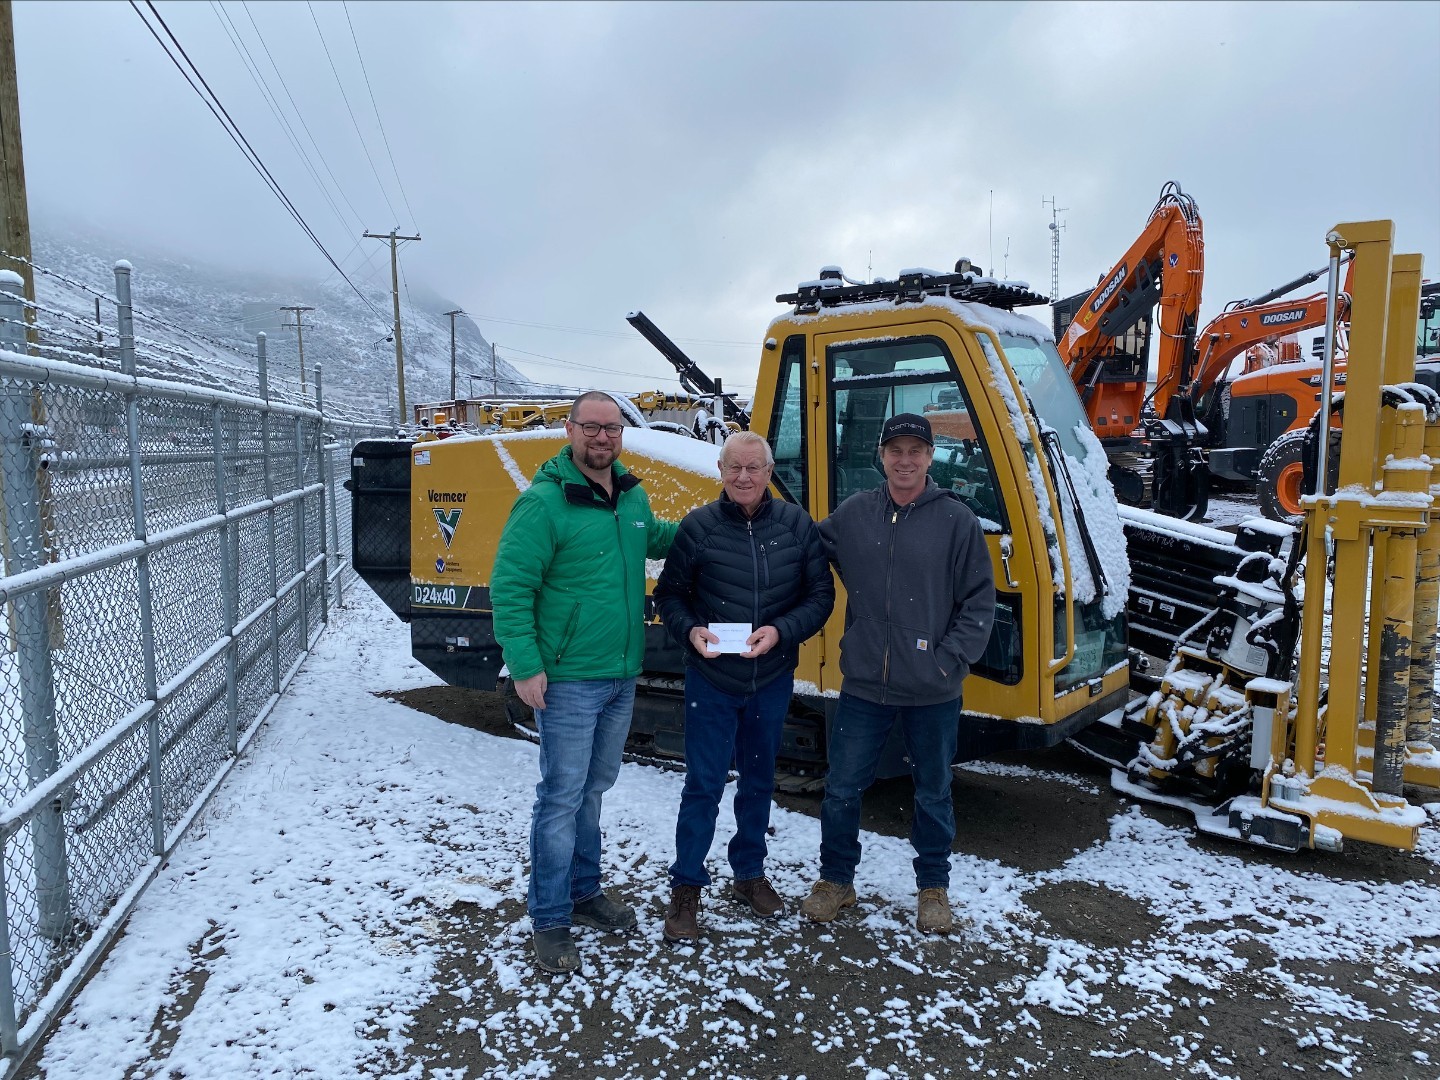 Congratulations to Netstar Construction, the winner of our last quarter's customer experience survey! 🎉
Winning the draw, they've saved $1,000 through GRIT Rewards points for future equipment maintenance and parts. Don't miss your opportunity to participate in our customer survey when you purchase equipment, parts or maintenance services from us – it could be your turn to win next time!

#CustomerAppreciation #CustomerLoyalty #CustomerSpotlight #SurveyWinner #GRITRewards #CustomerRelations #VermeerBC